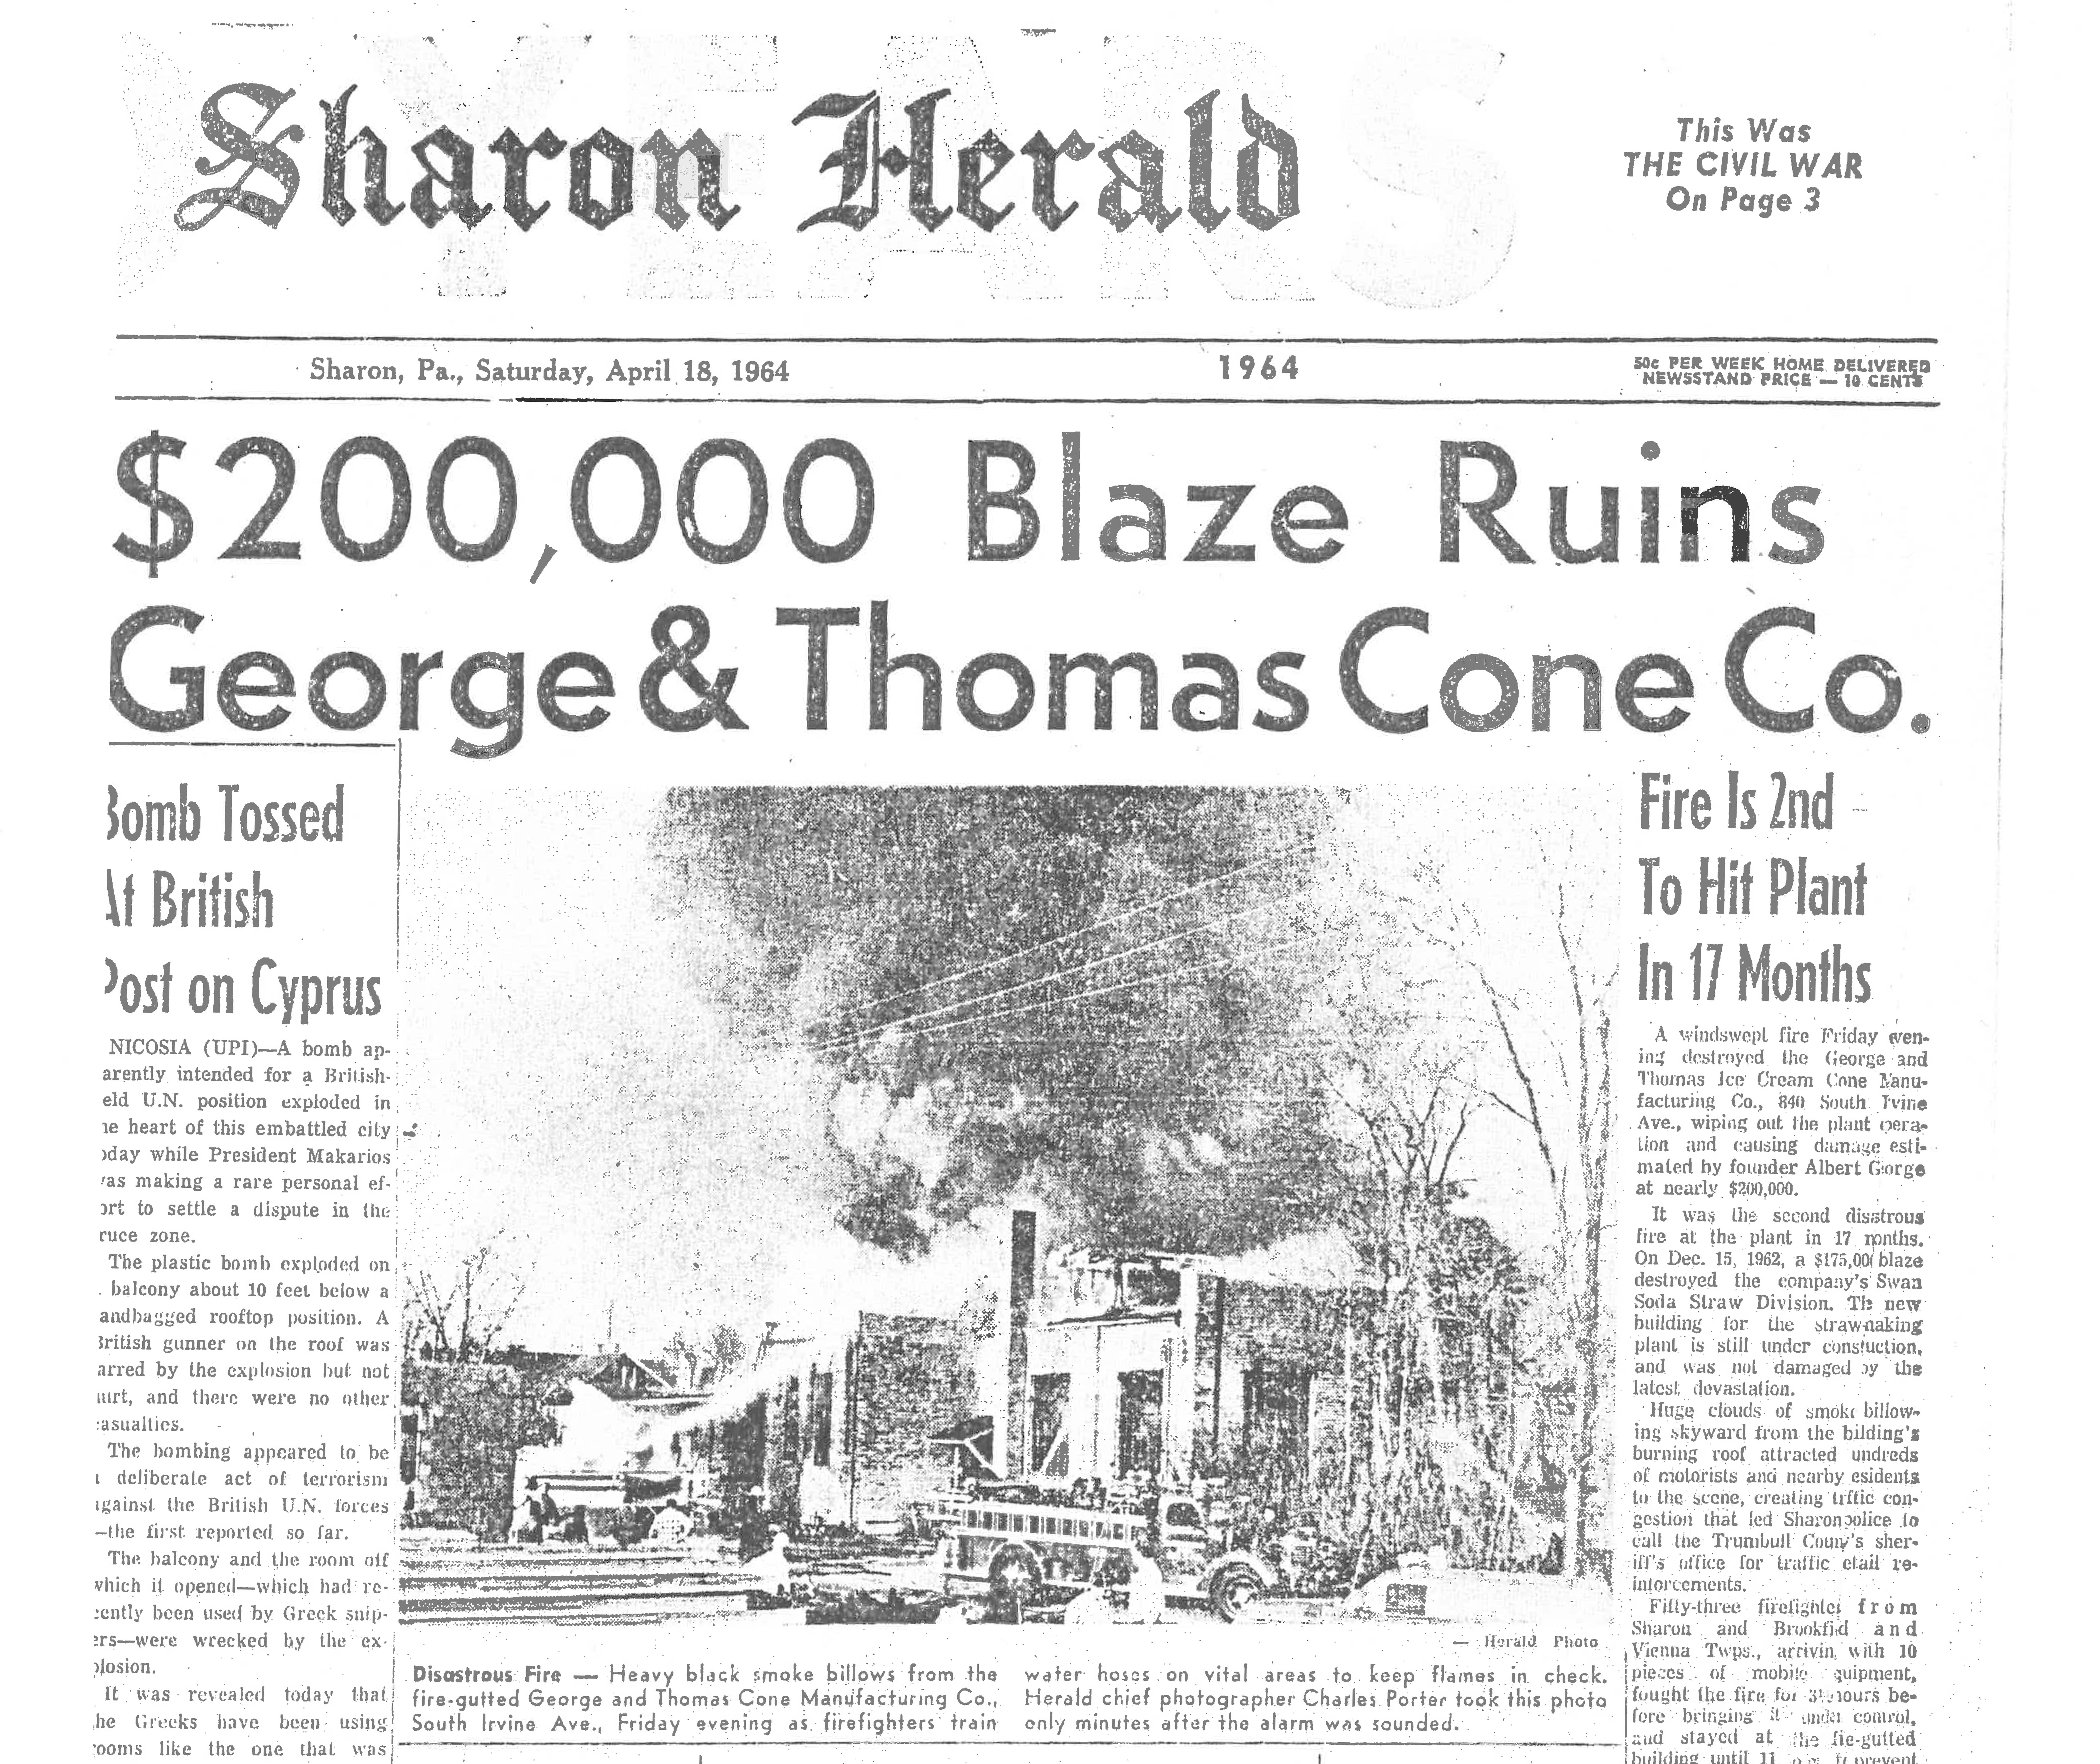 Article taken from the Herald concerning the second fire in 1964